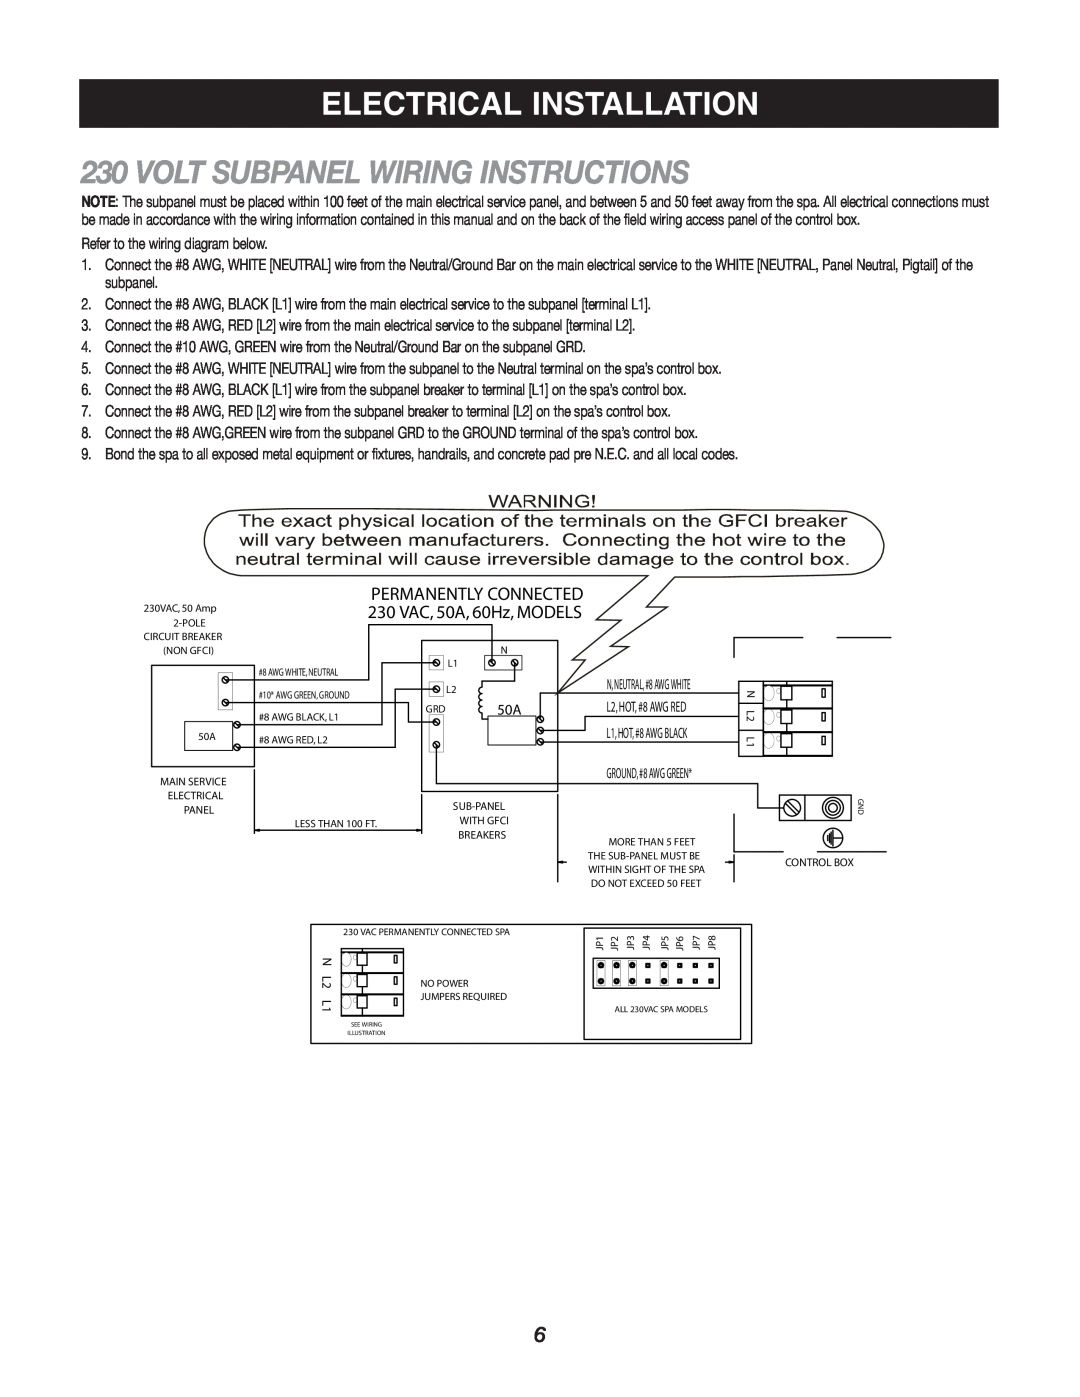 Caldera Highland Series owner manual Volt Subpanel Wiring Instructions, Electrical Installation 